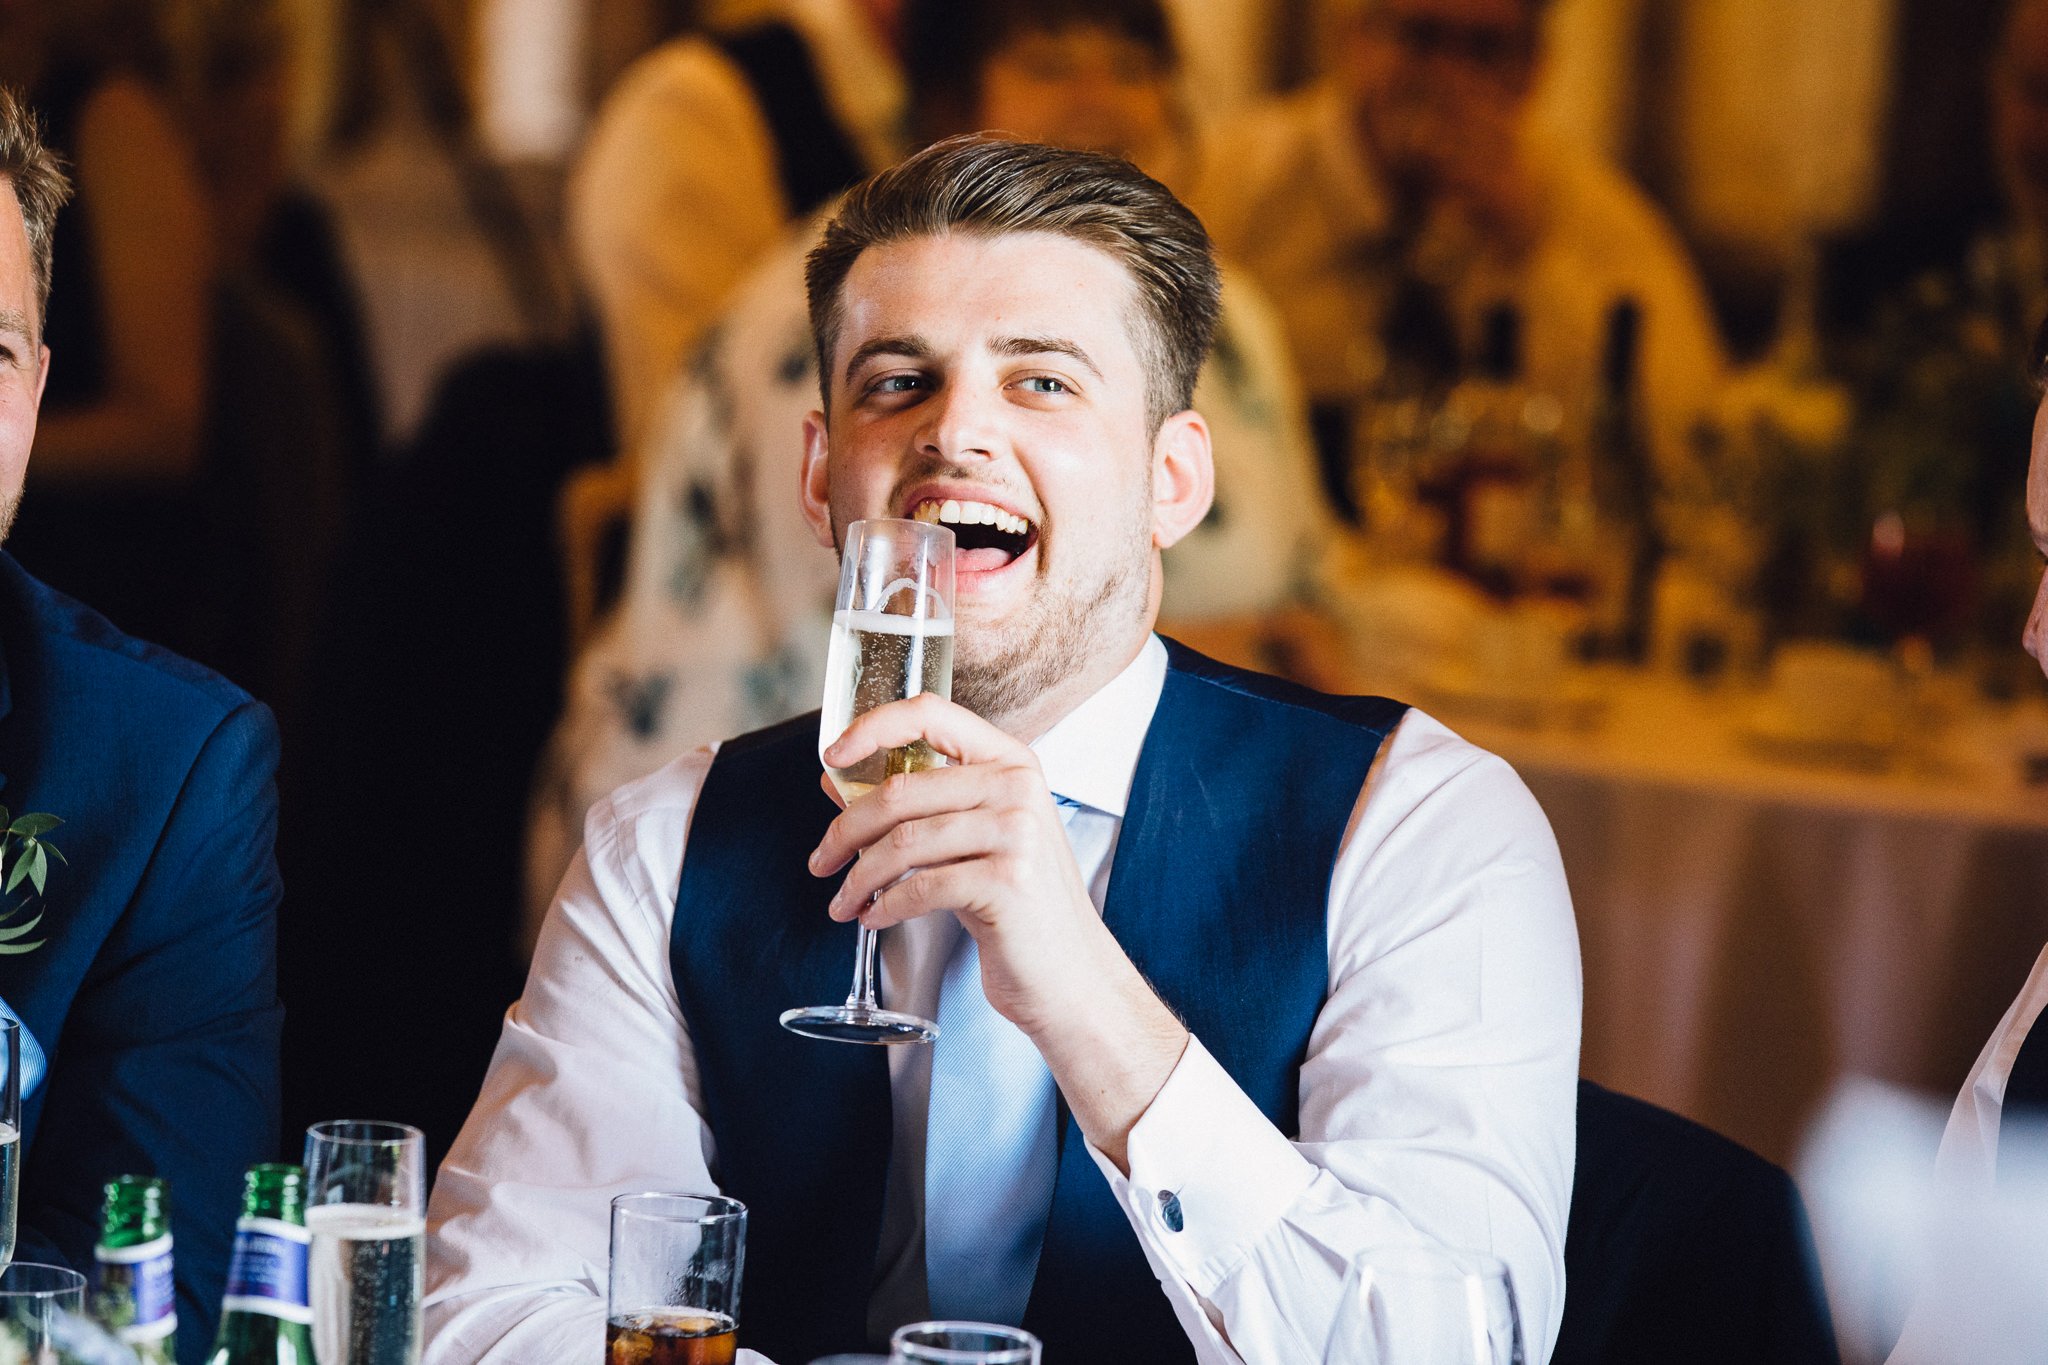  Groomsman laughs during the speeches  